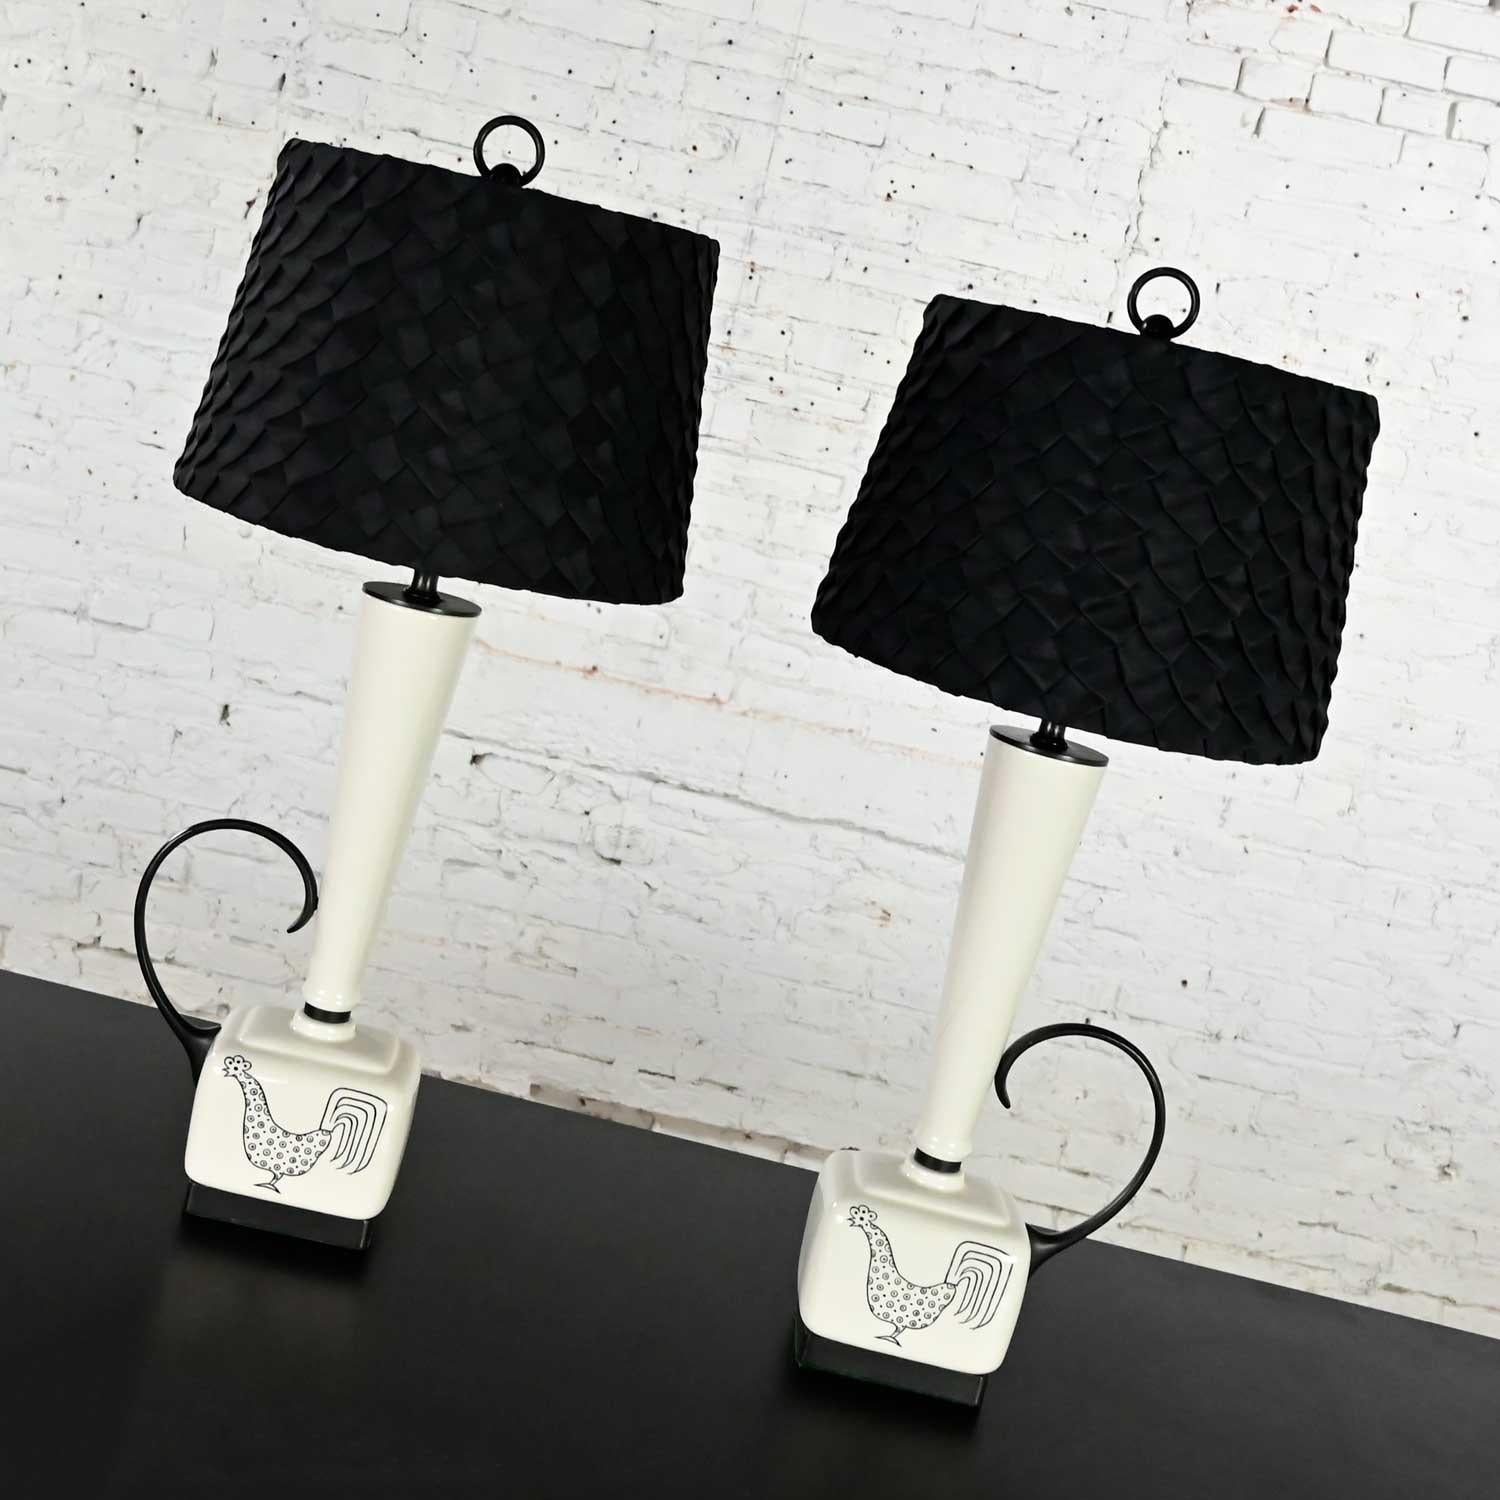 Mid-Century Modern Black and White Ceramic Lamps w/ Rooster Design, a Pair For Sale 2